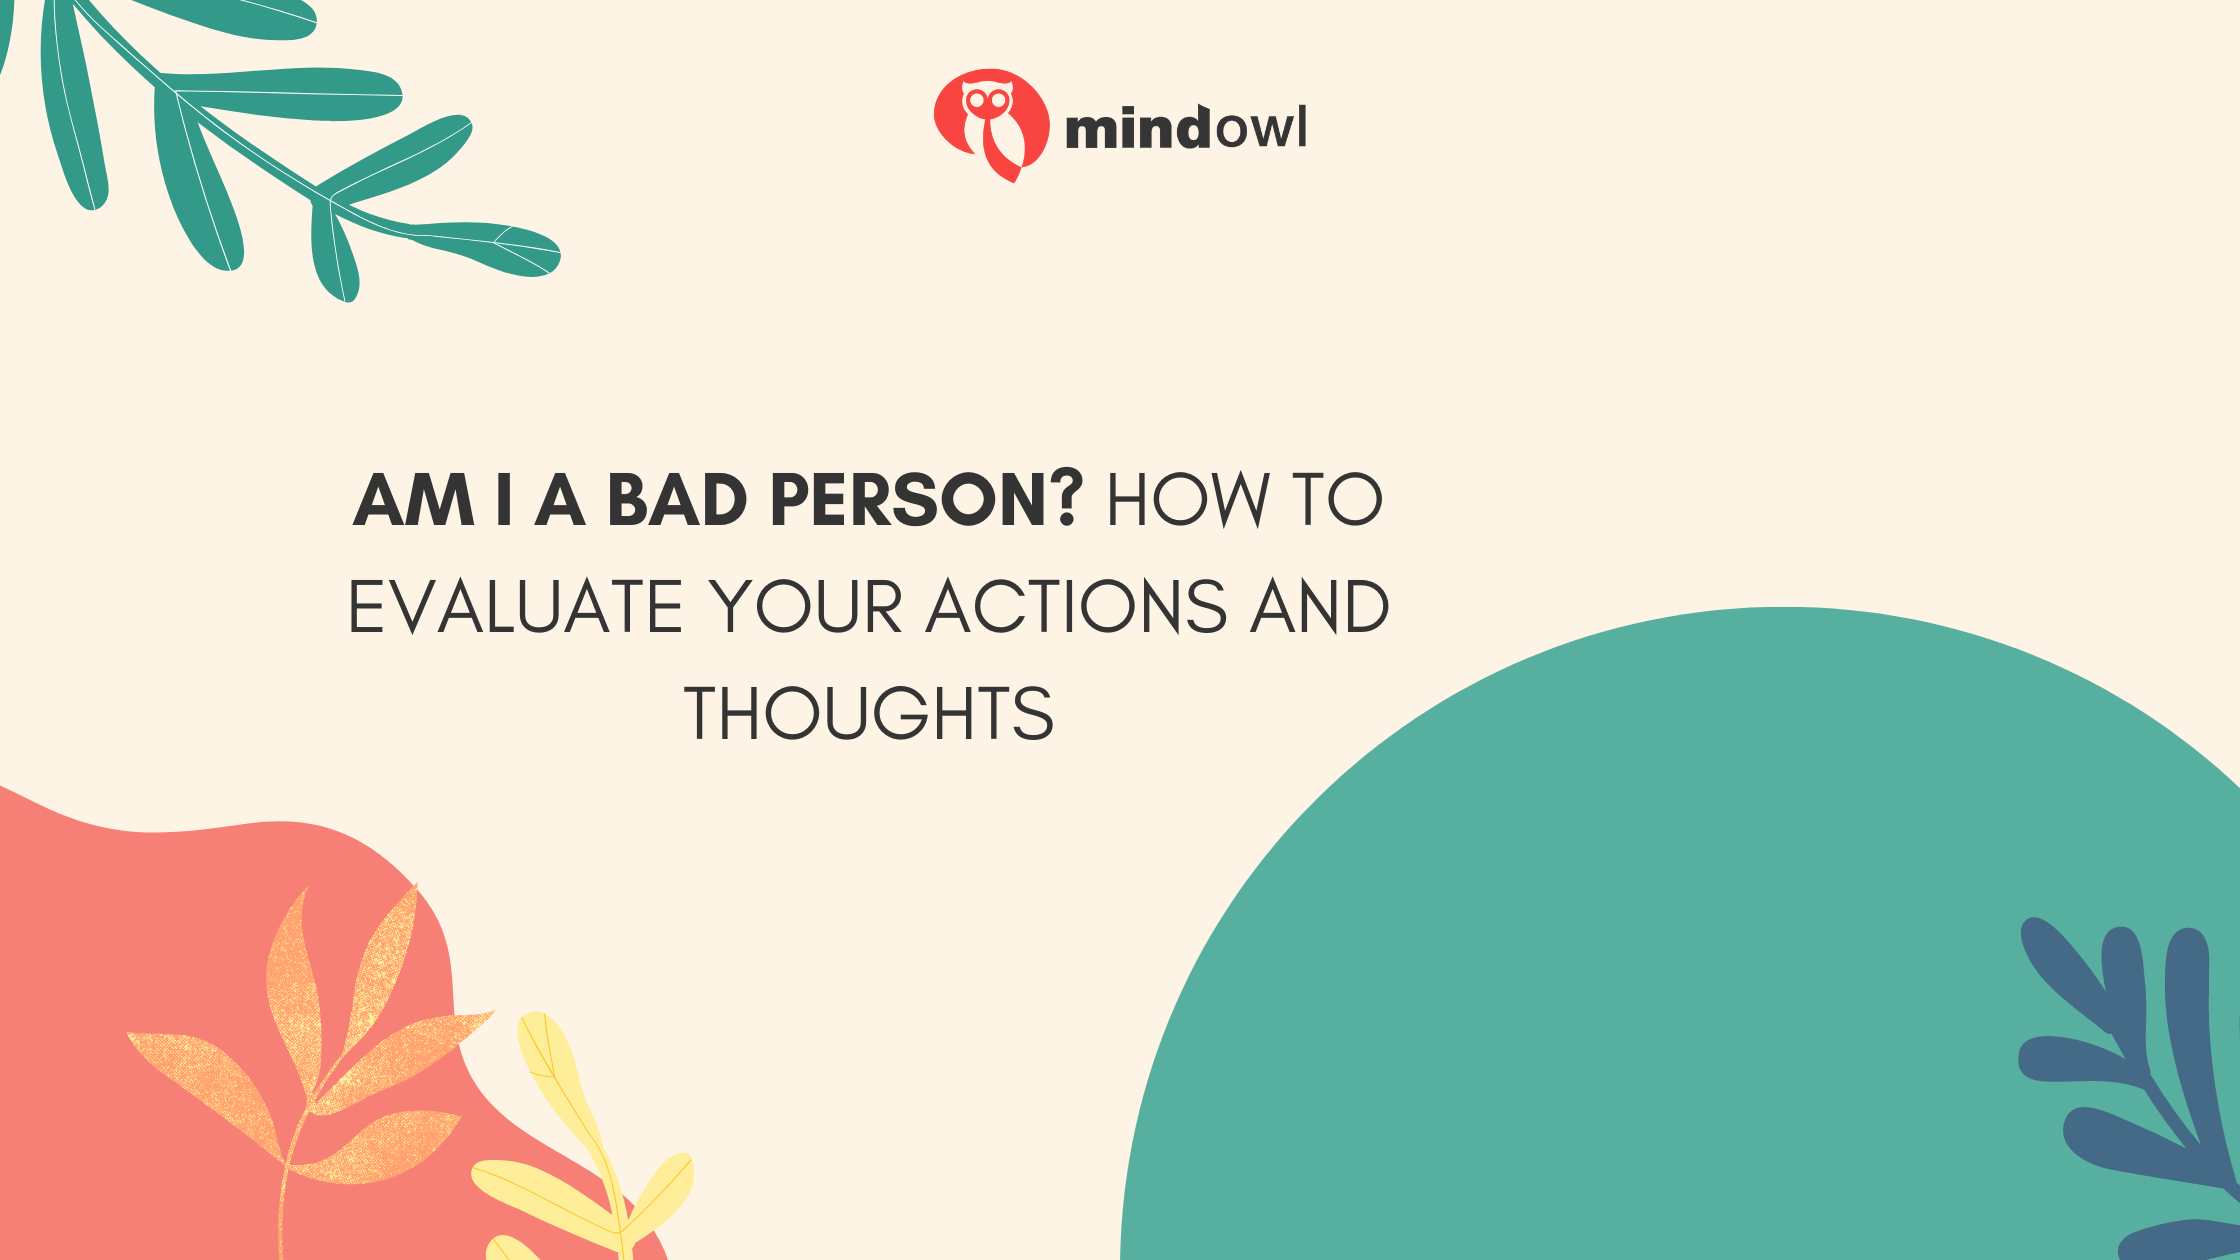 Am I a Bad Person? How to Evaluate Your Actions and Thoughts